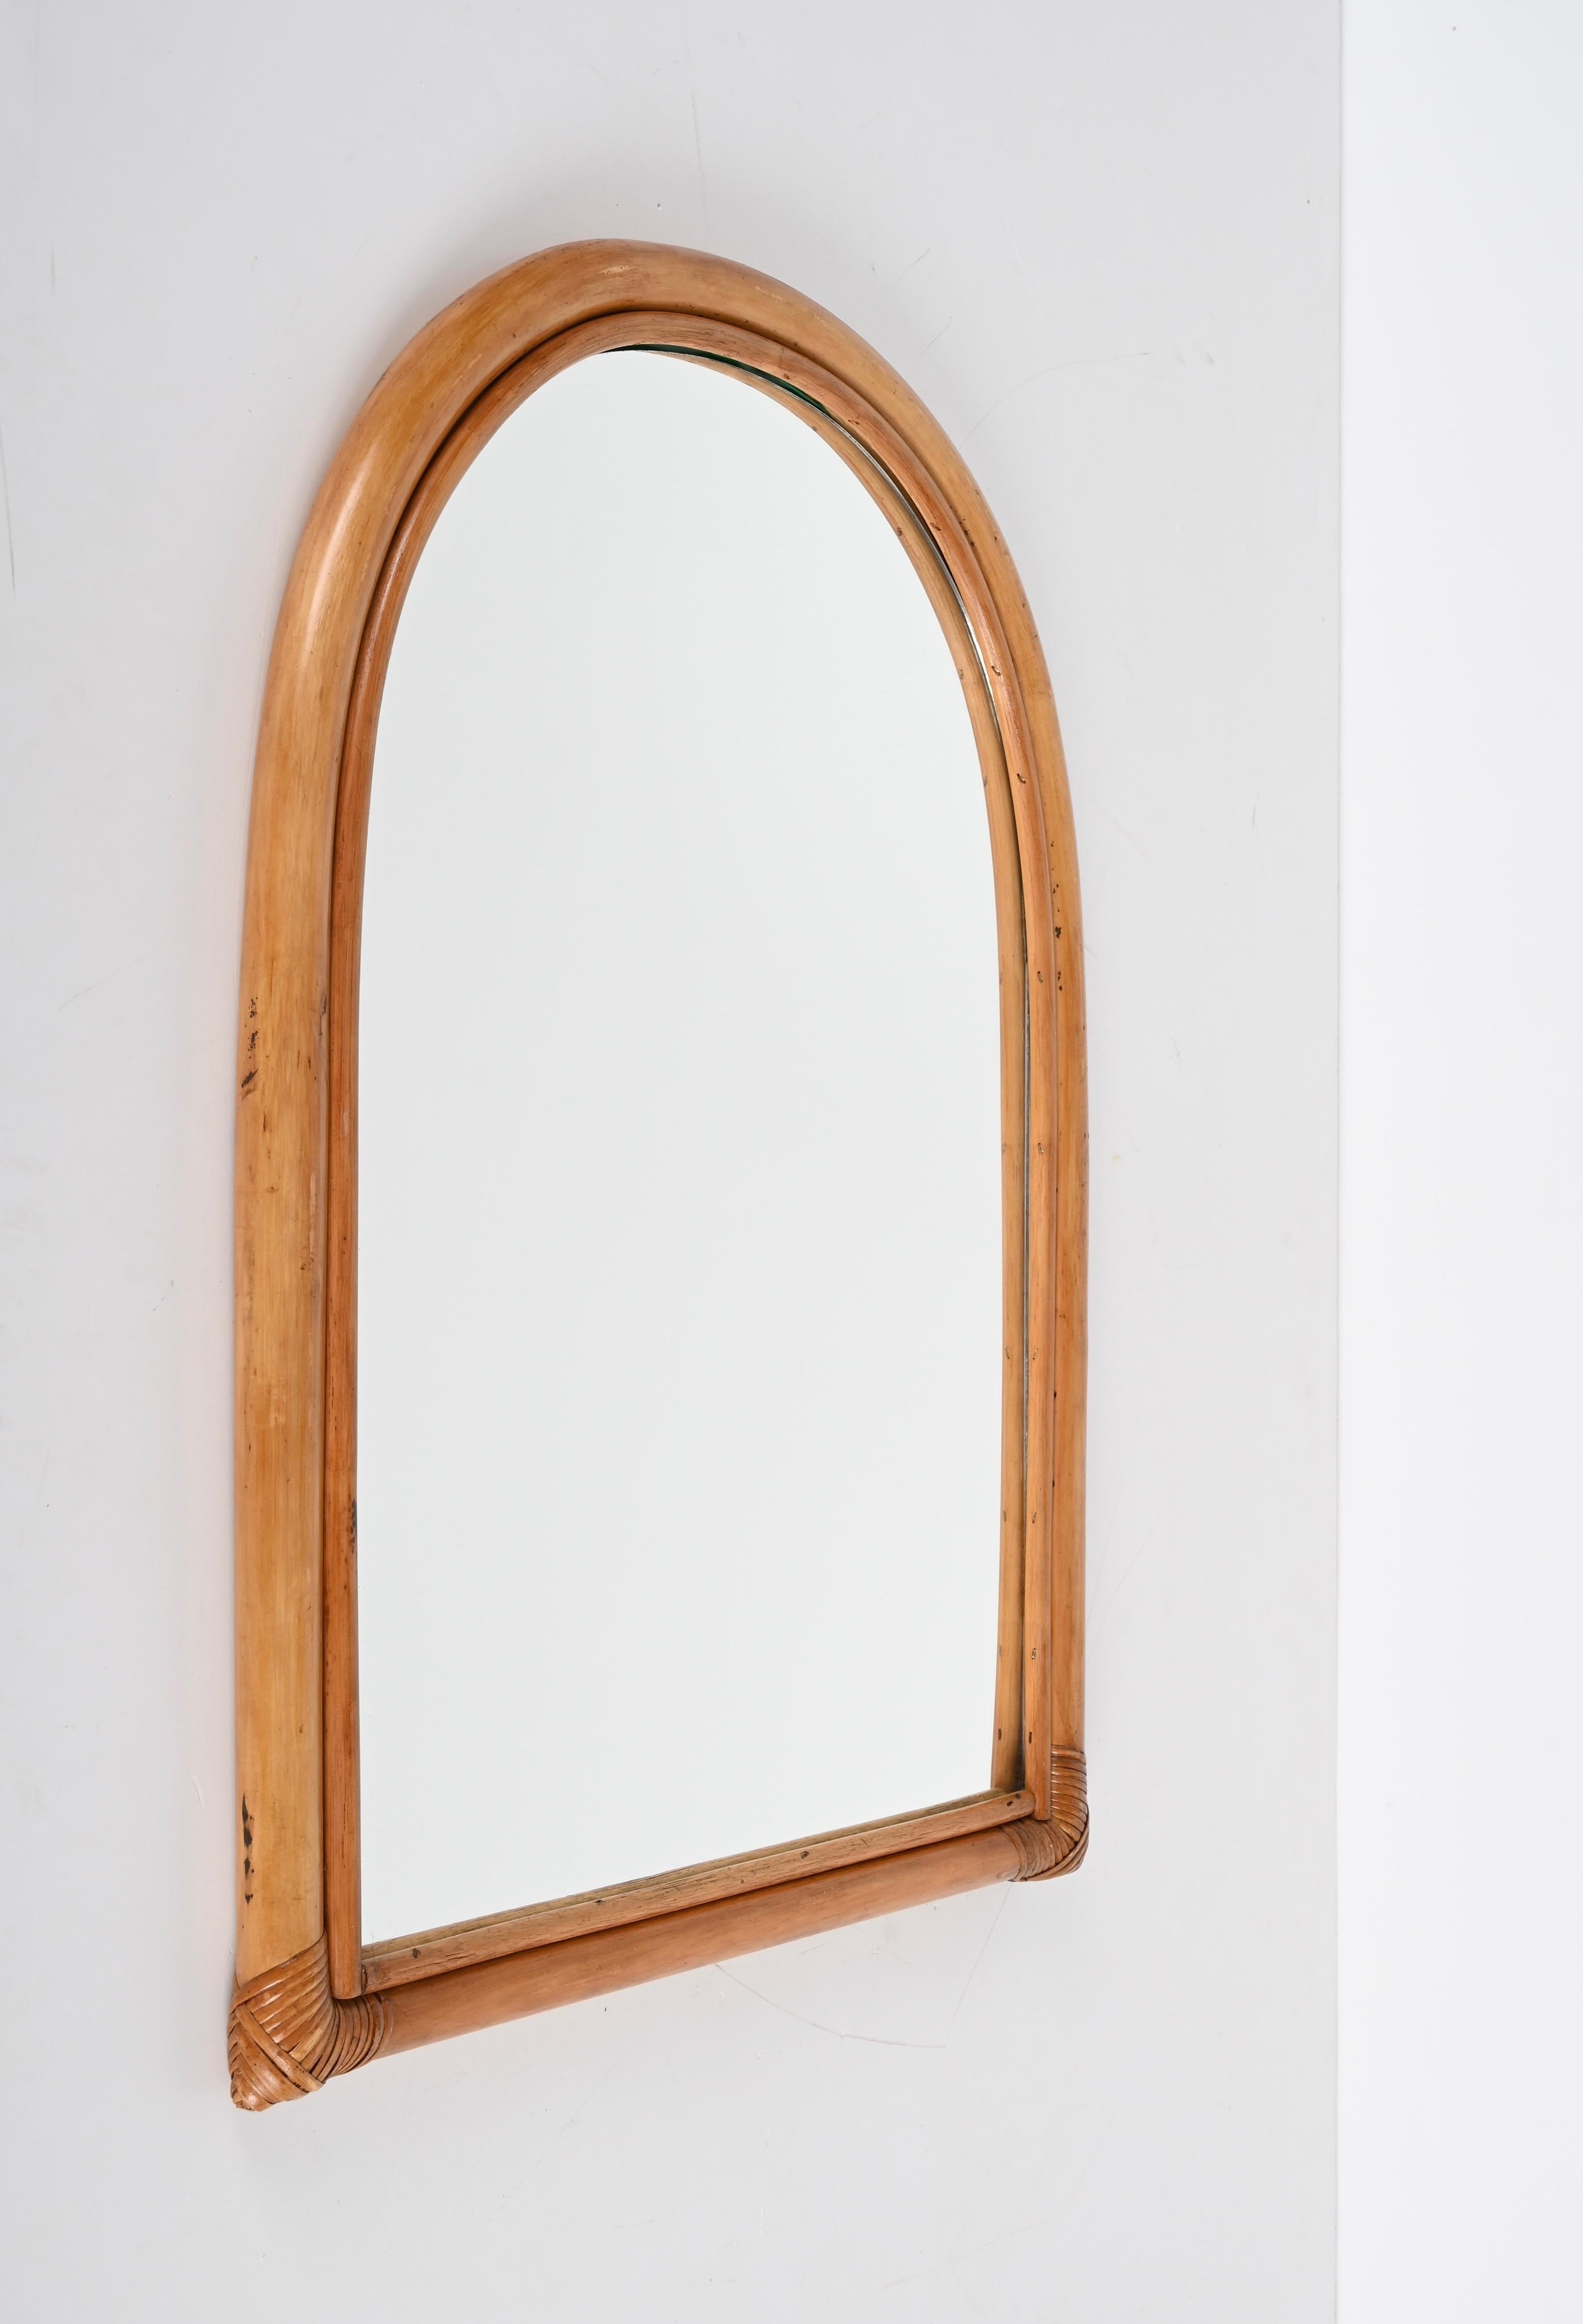 20th Century Midcentury Italian Arch-Shaped Mirror with Double Bamboo Wicker Frame, 1970s